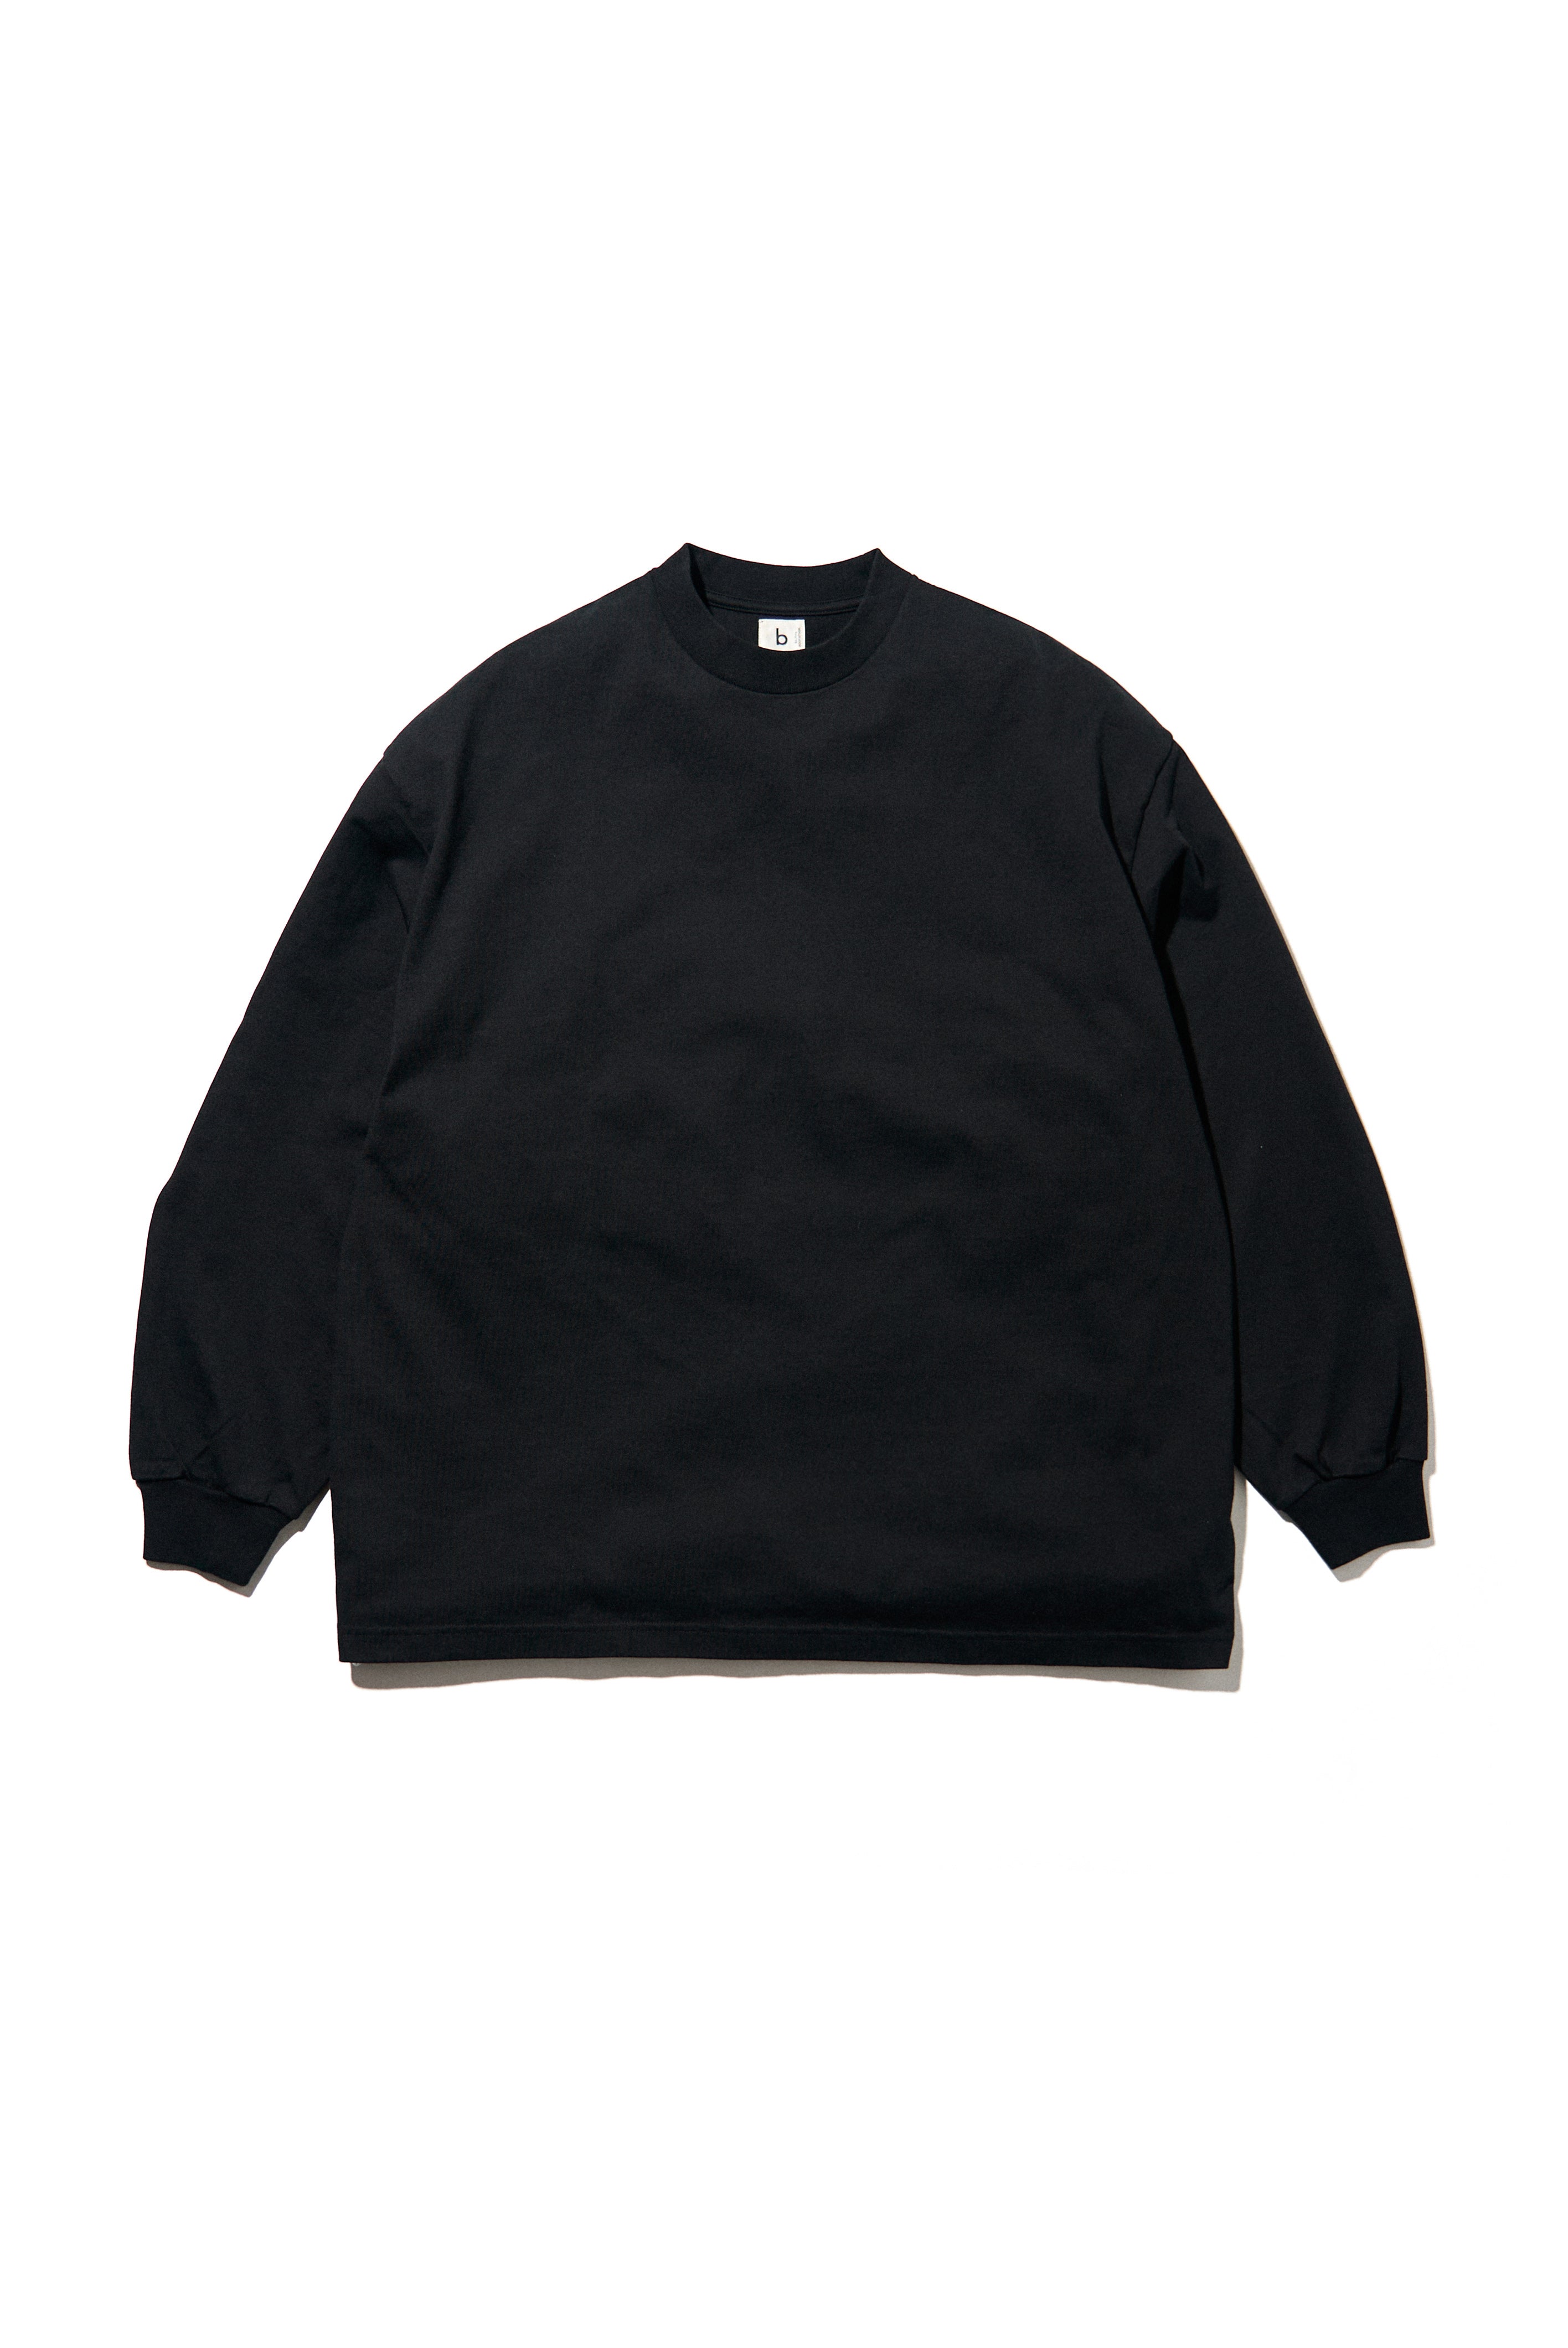 blurhmsROOTSTOCK for FreshService L/S Tee – FreshService® official